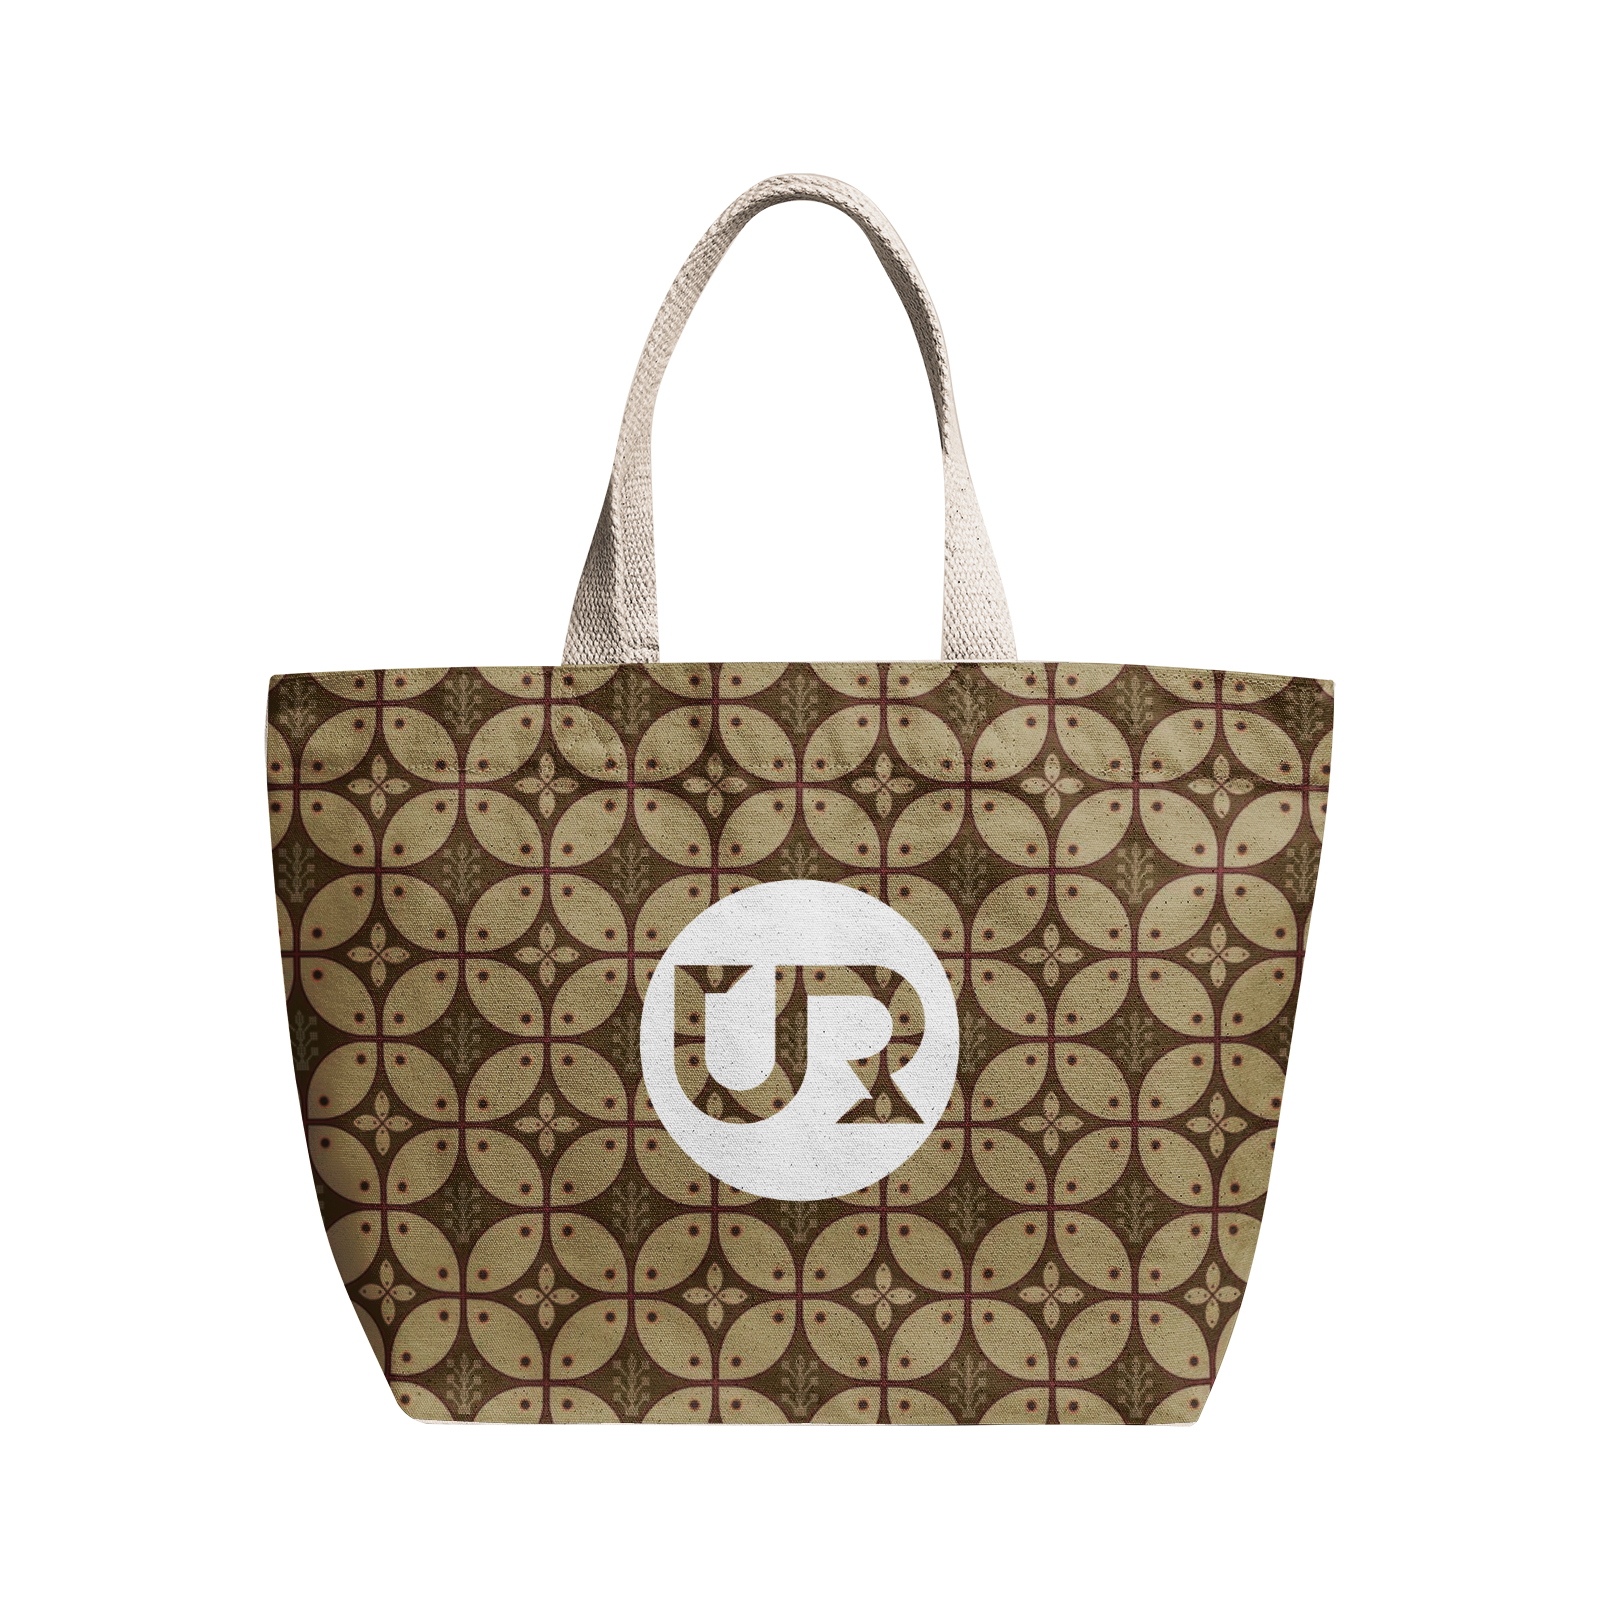 Heavy Duty and Strong Natural Cotton Canvas Tote Bag - UGO ROMANO URTB078